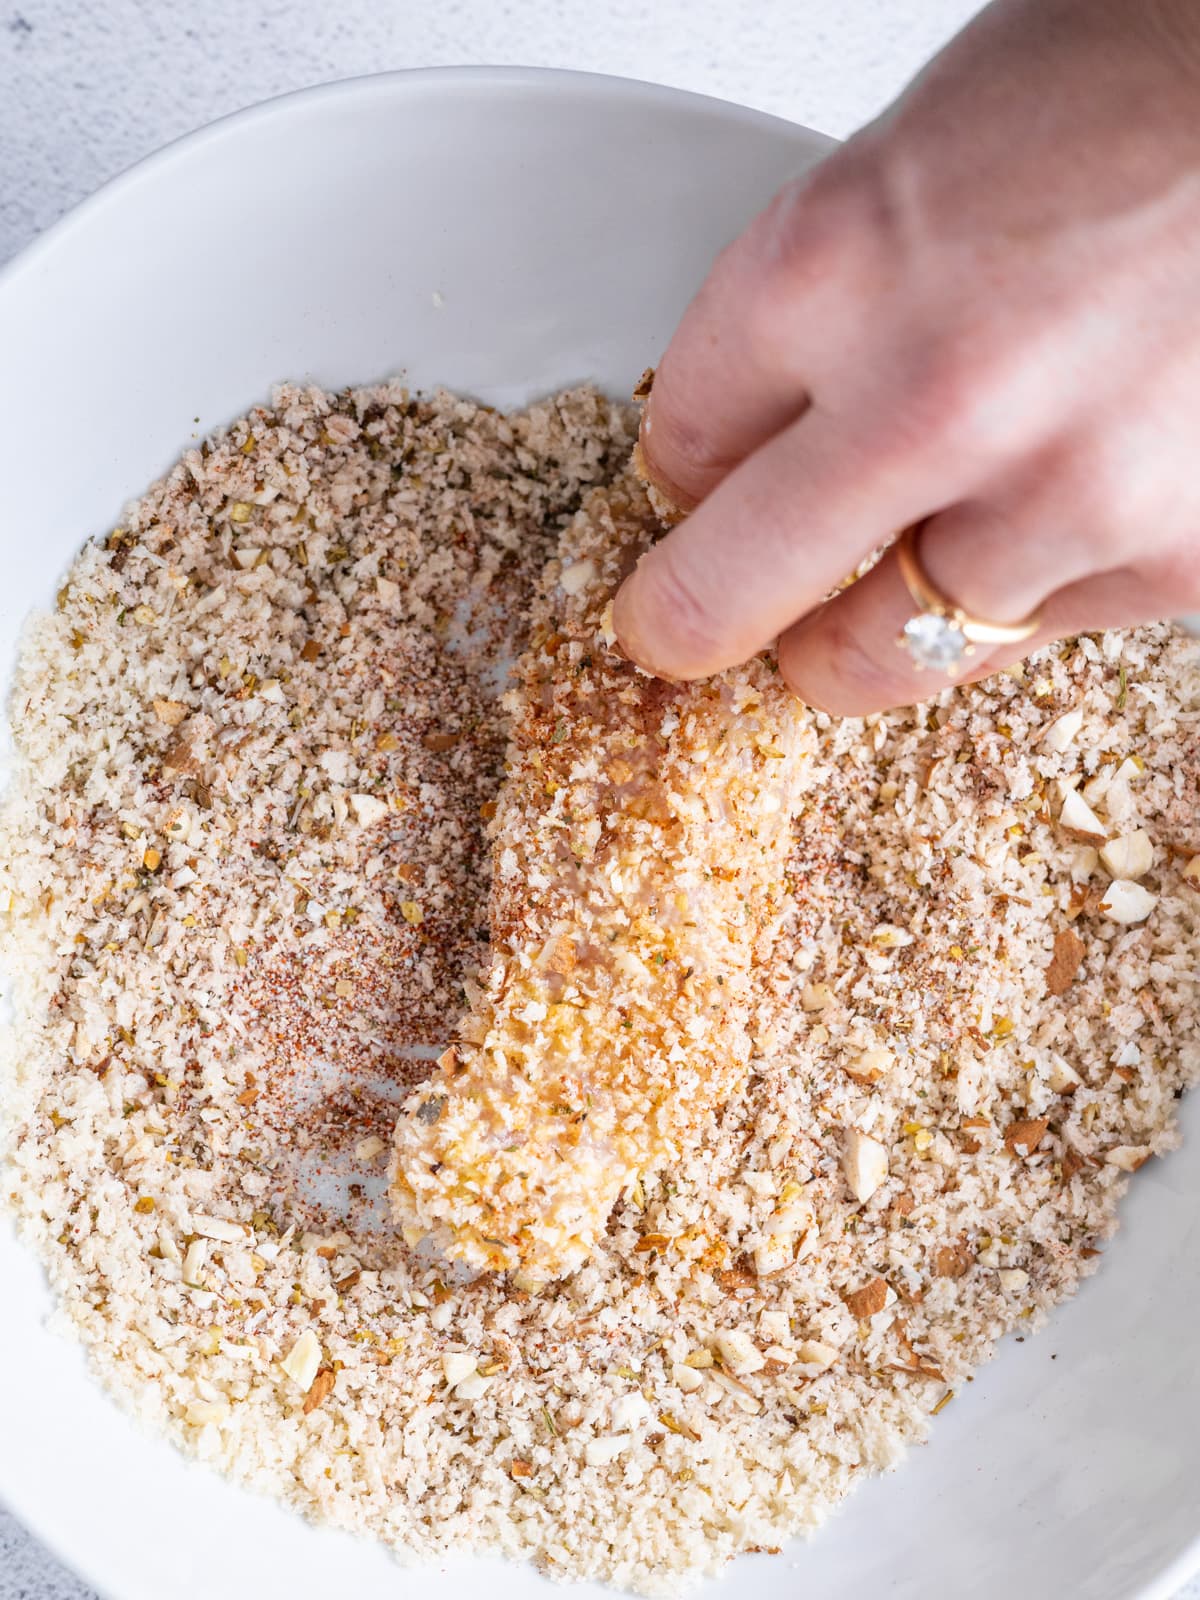 A chicken breast being dipped in breading in a white bowl.